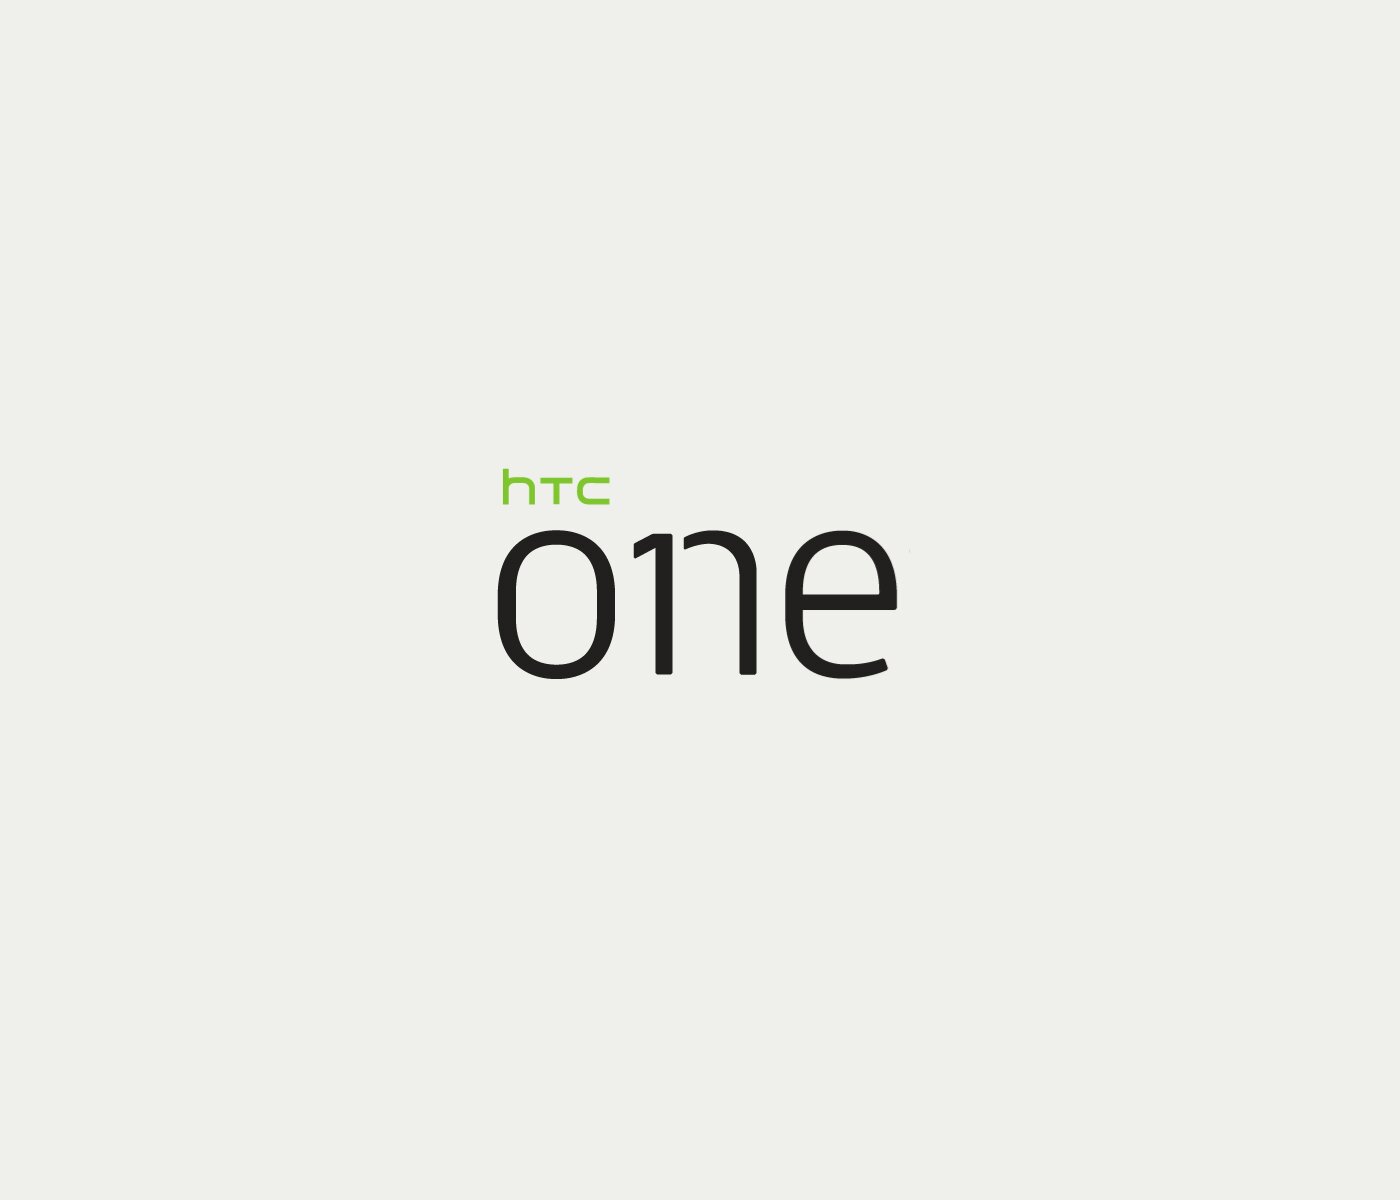 World of Wallpapers: HTC One (Rumored As HTC M7)